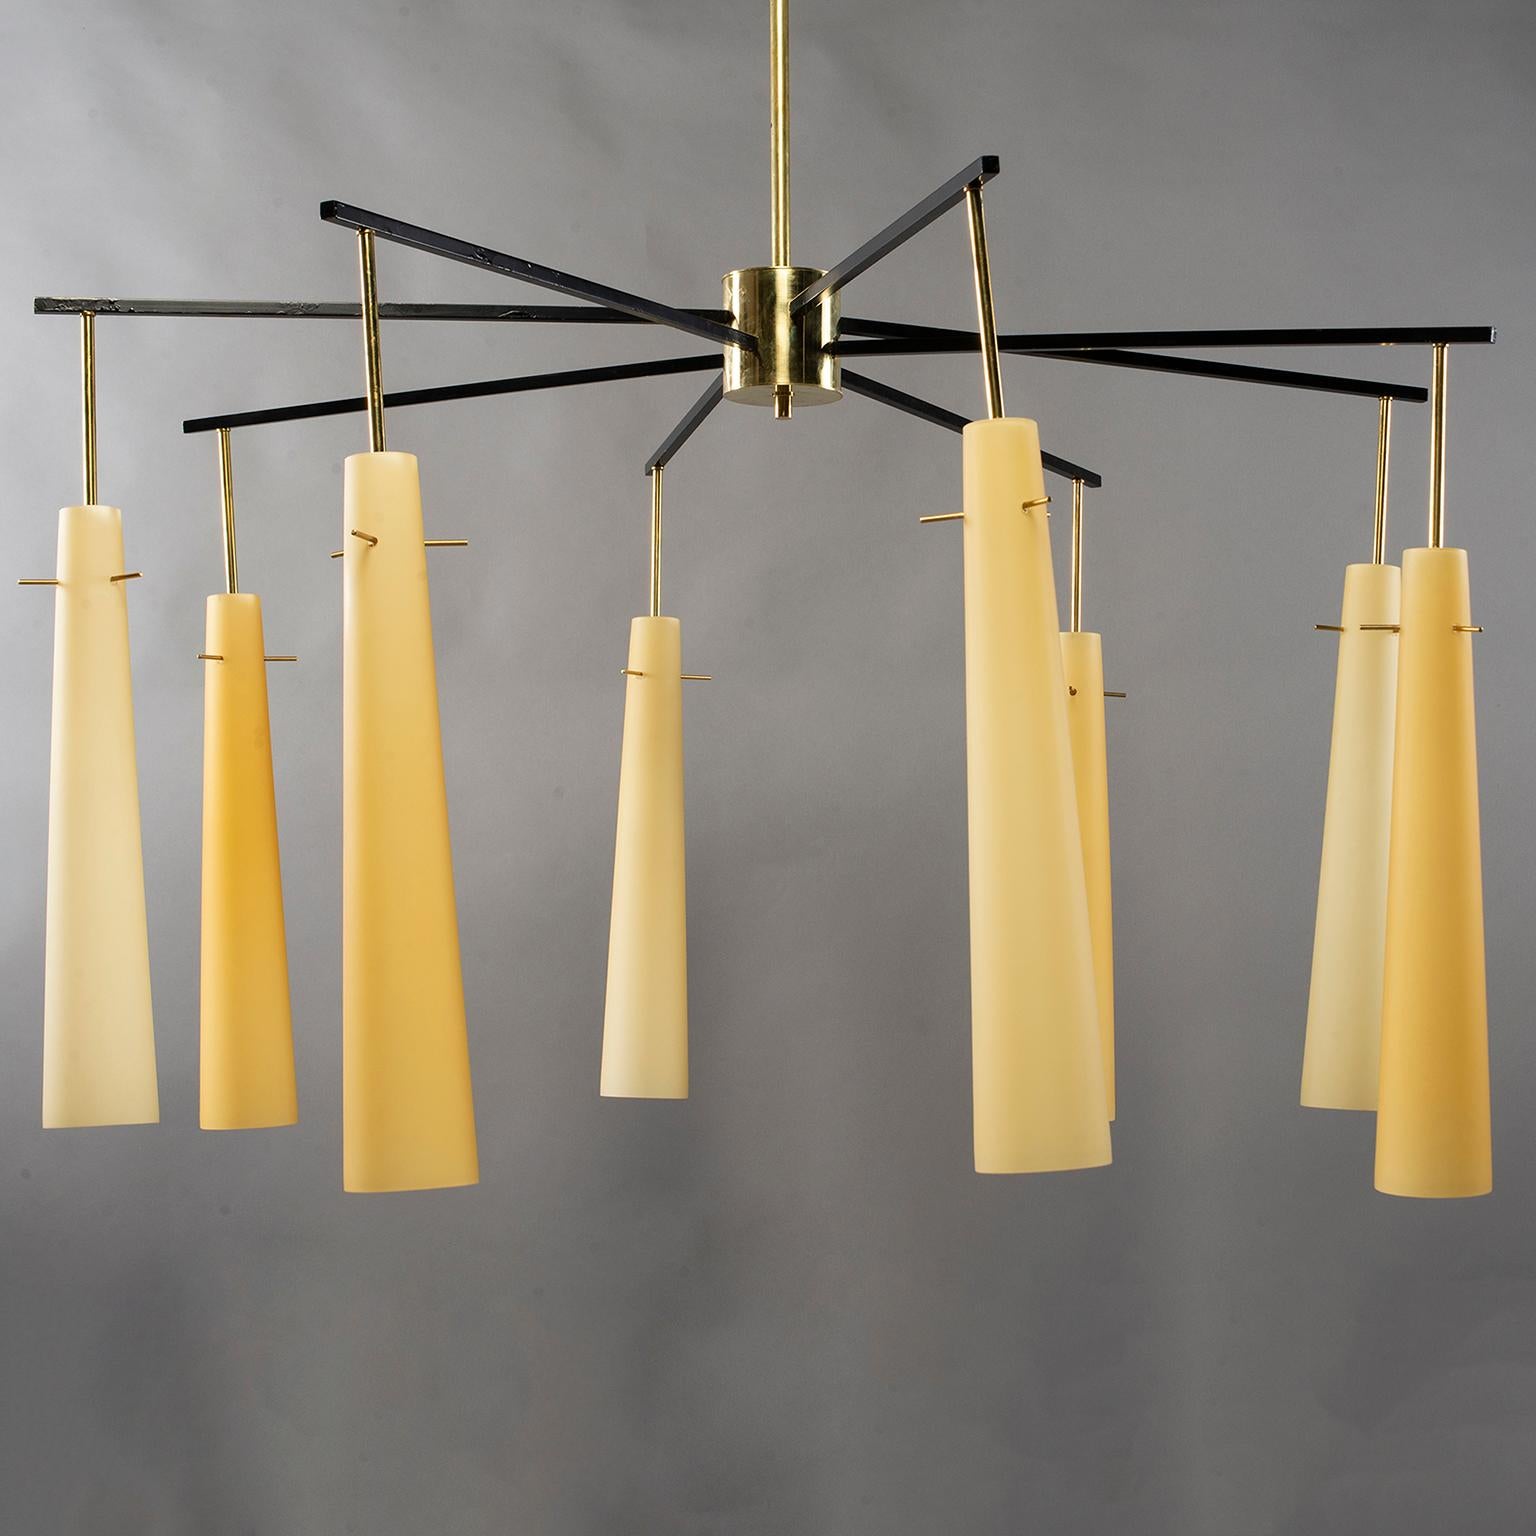 Large dramatic midcentury Italian light fixture / chandelier has a polished brass canopy, stem and hub with eight black metal arms that support long, narrow off-white glass globes suspended by brass pins. Each glass cone has a candelabra sized